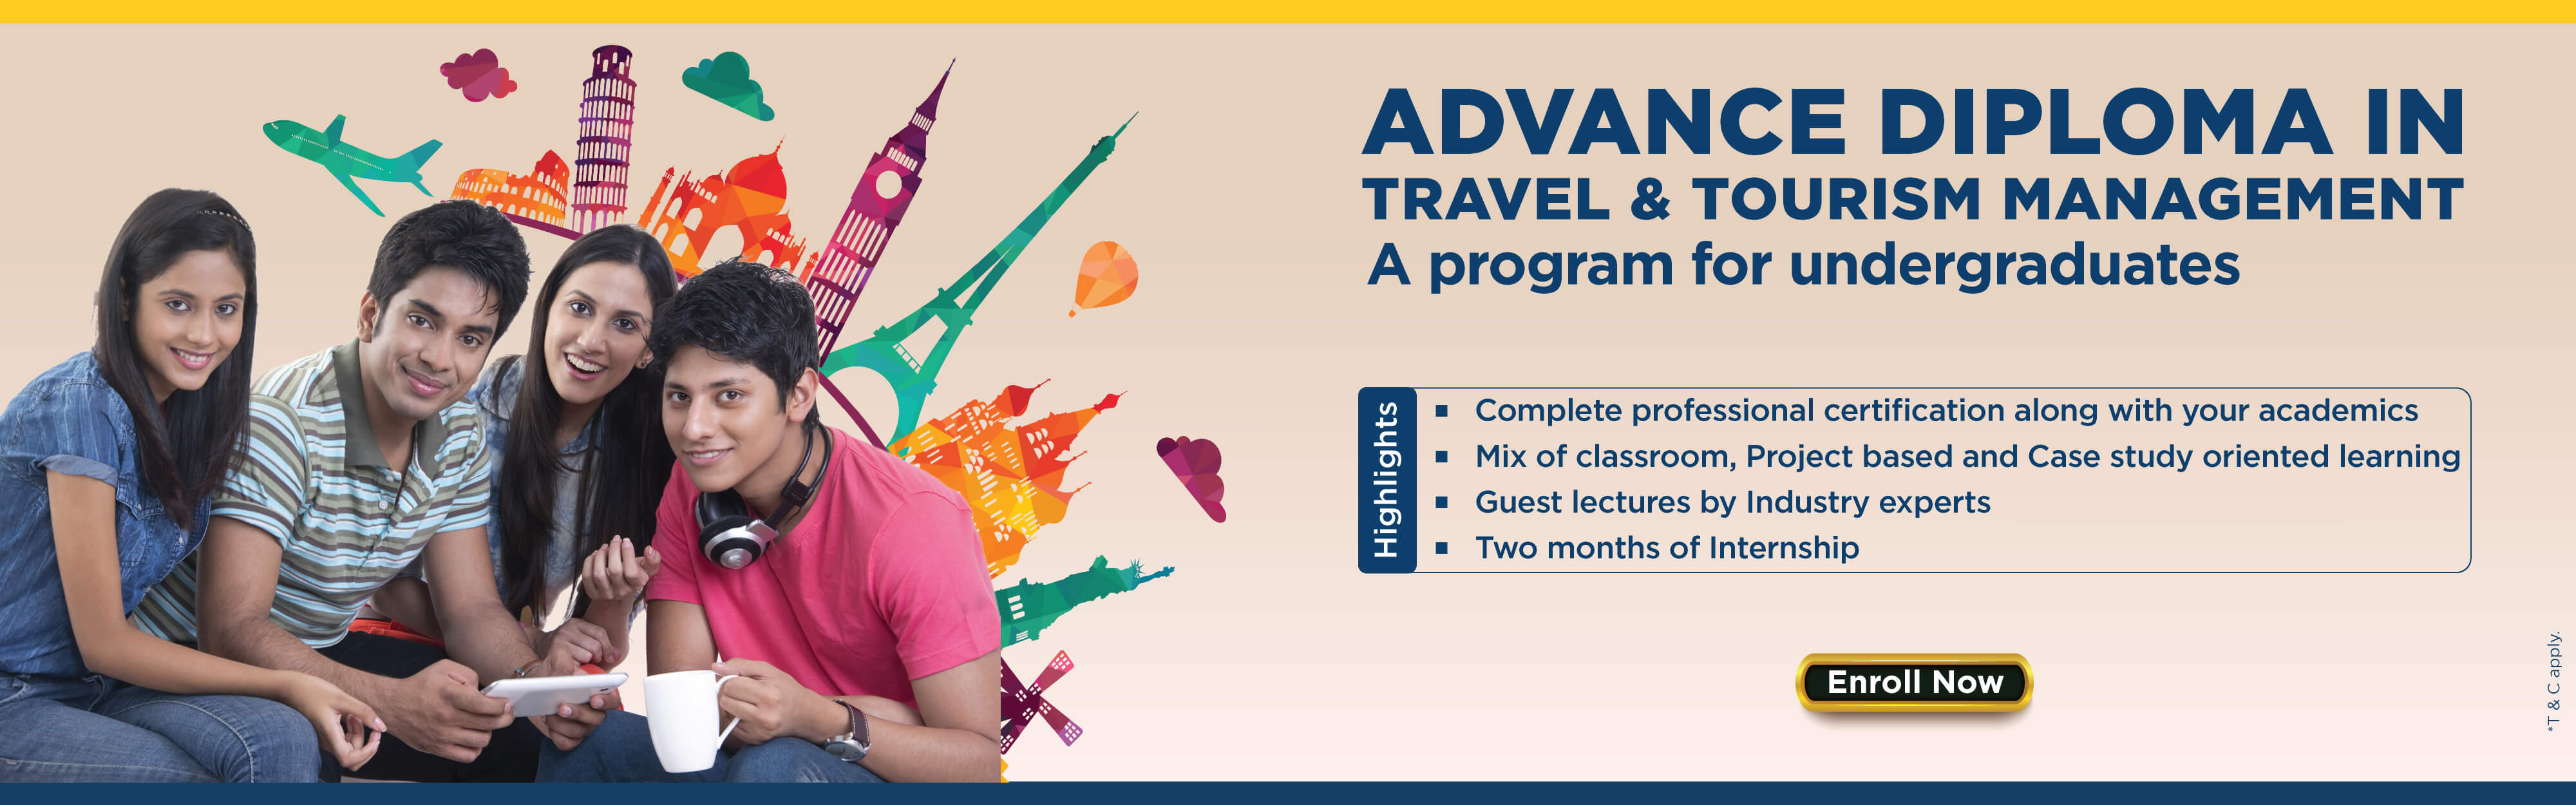 Advanced diploma in travel and tourism management